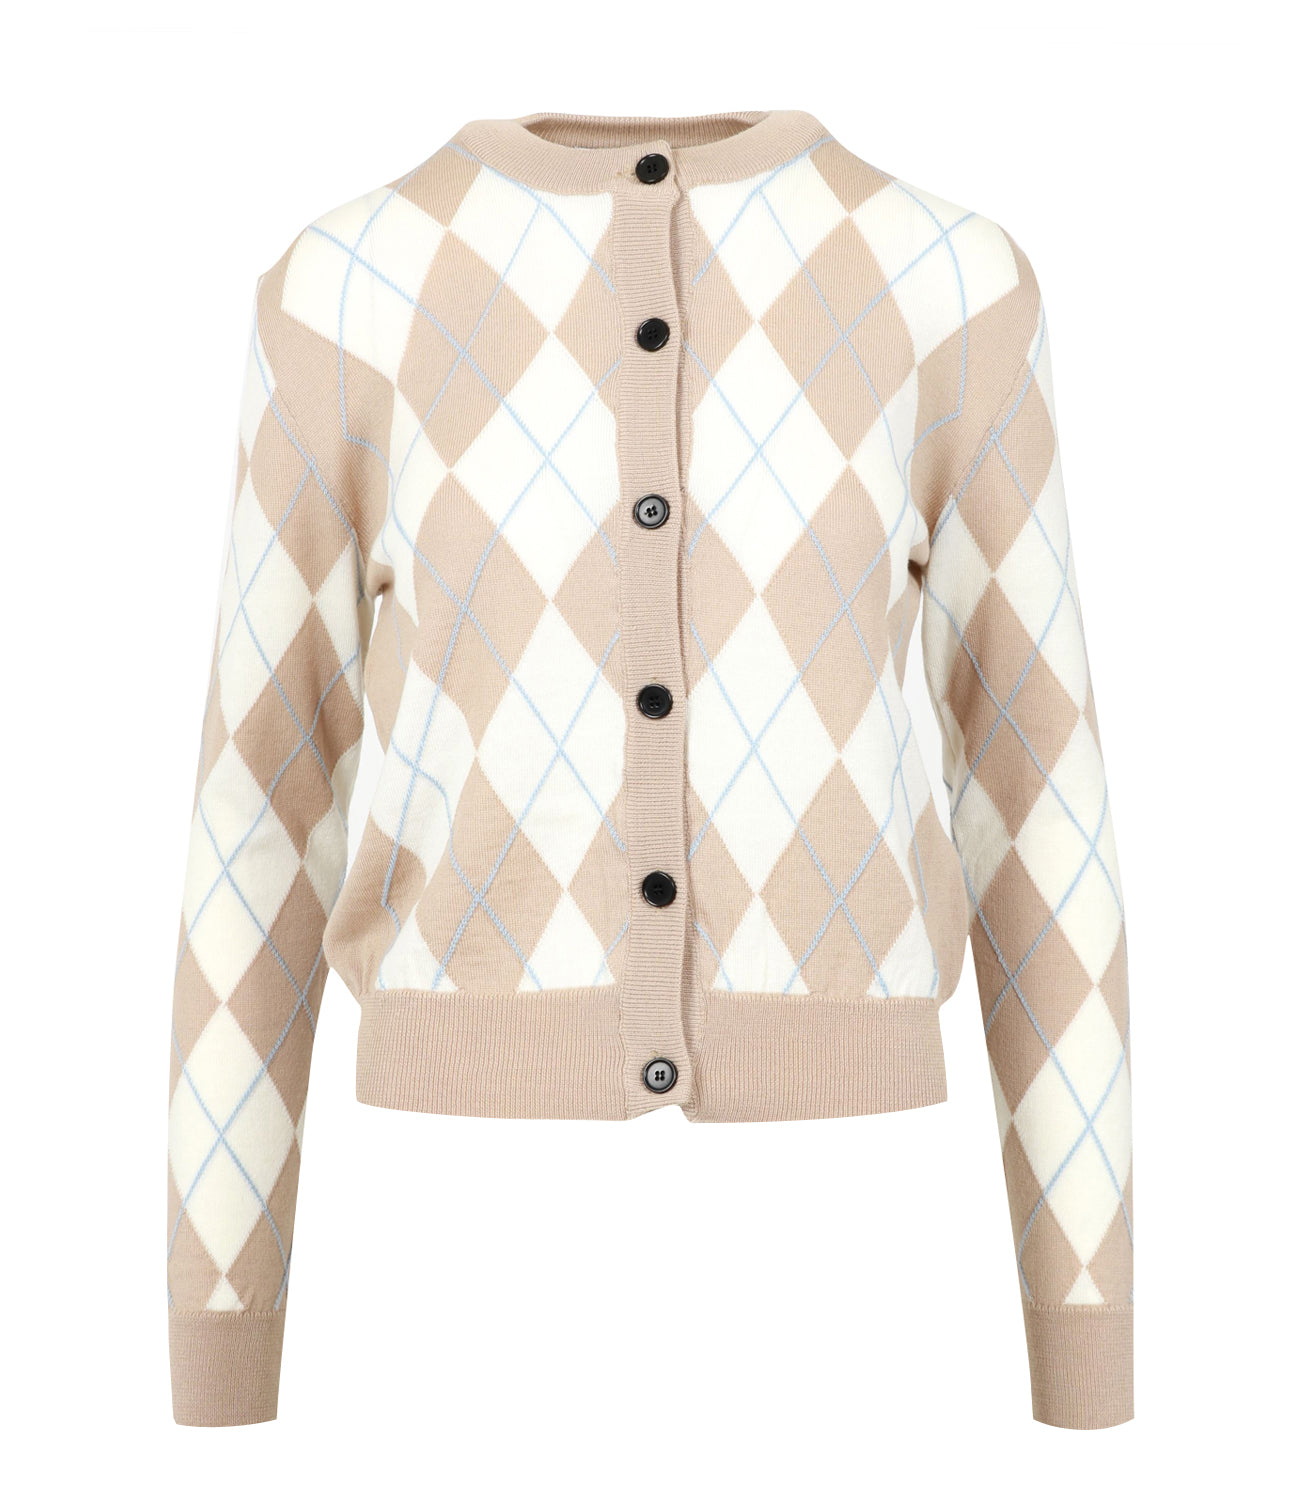 MSGM | Beige and White Sweater